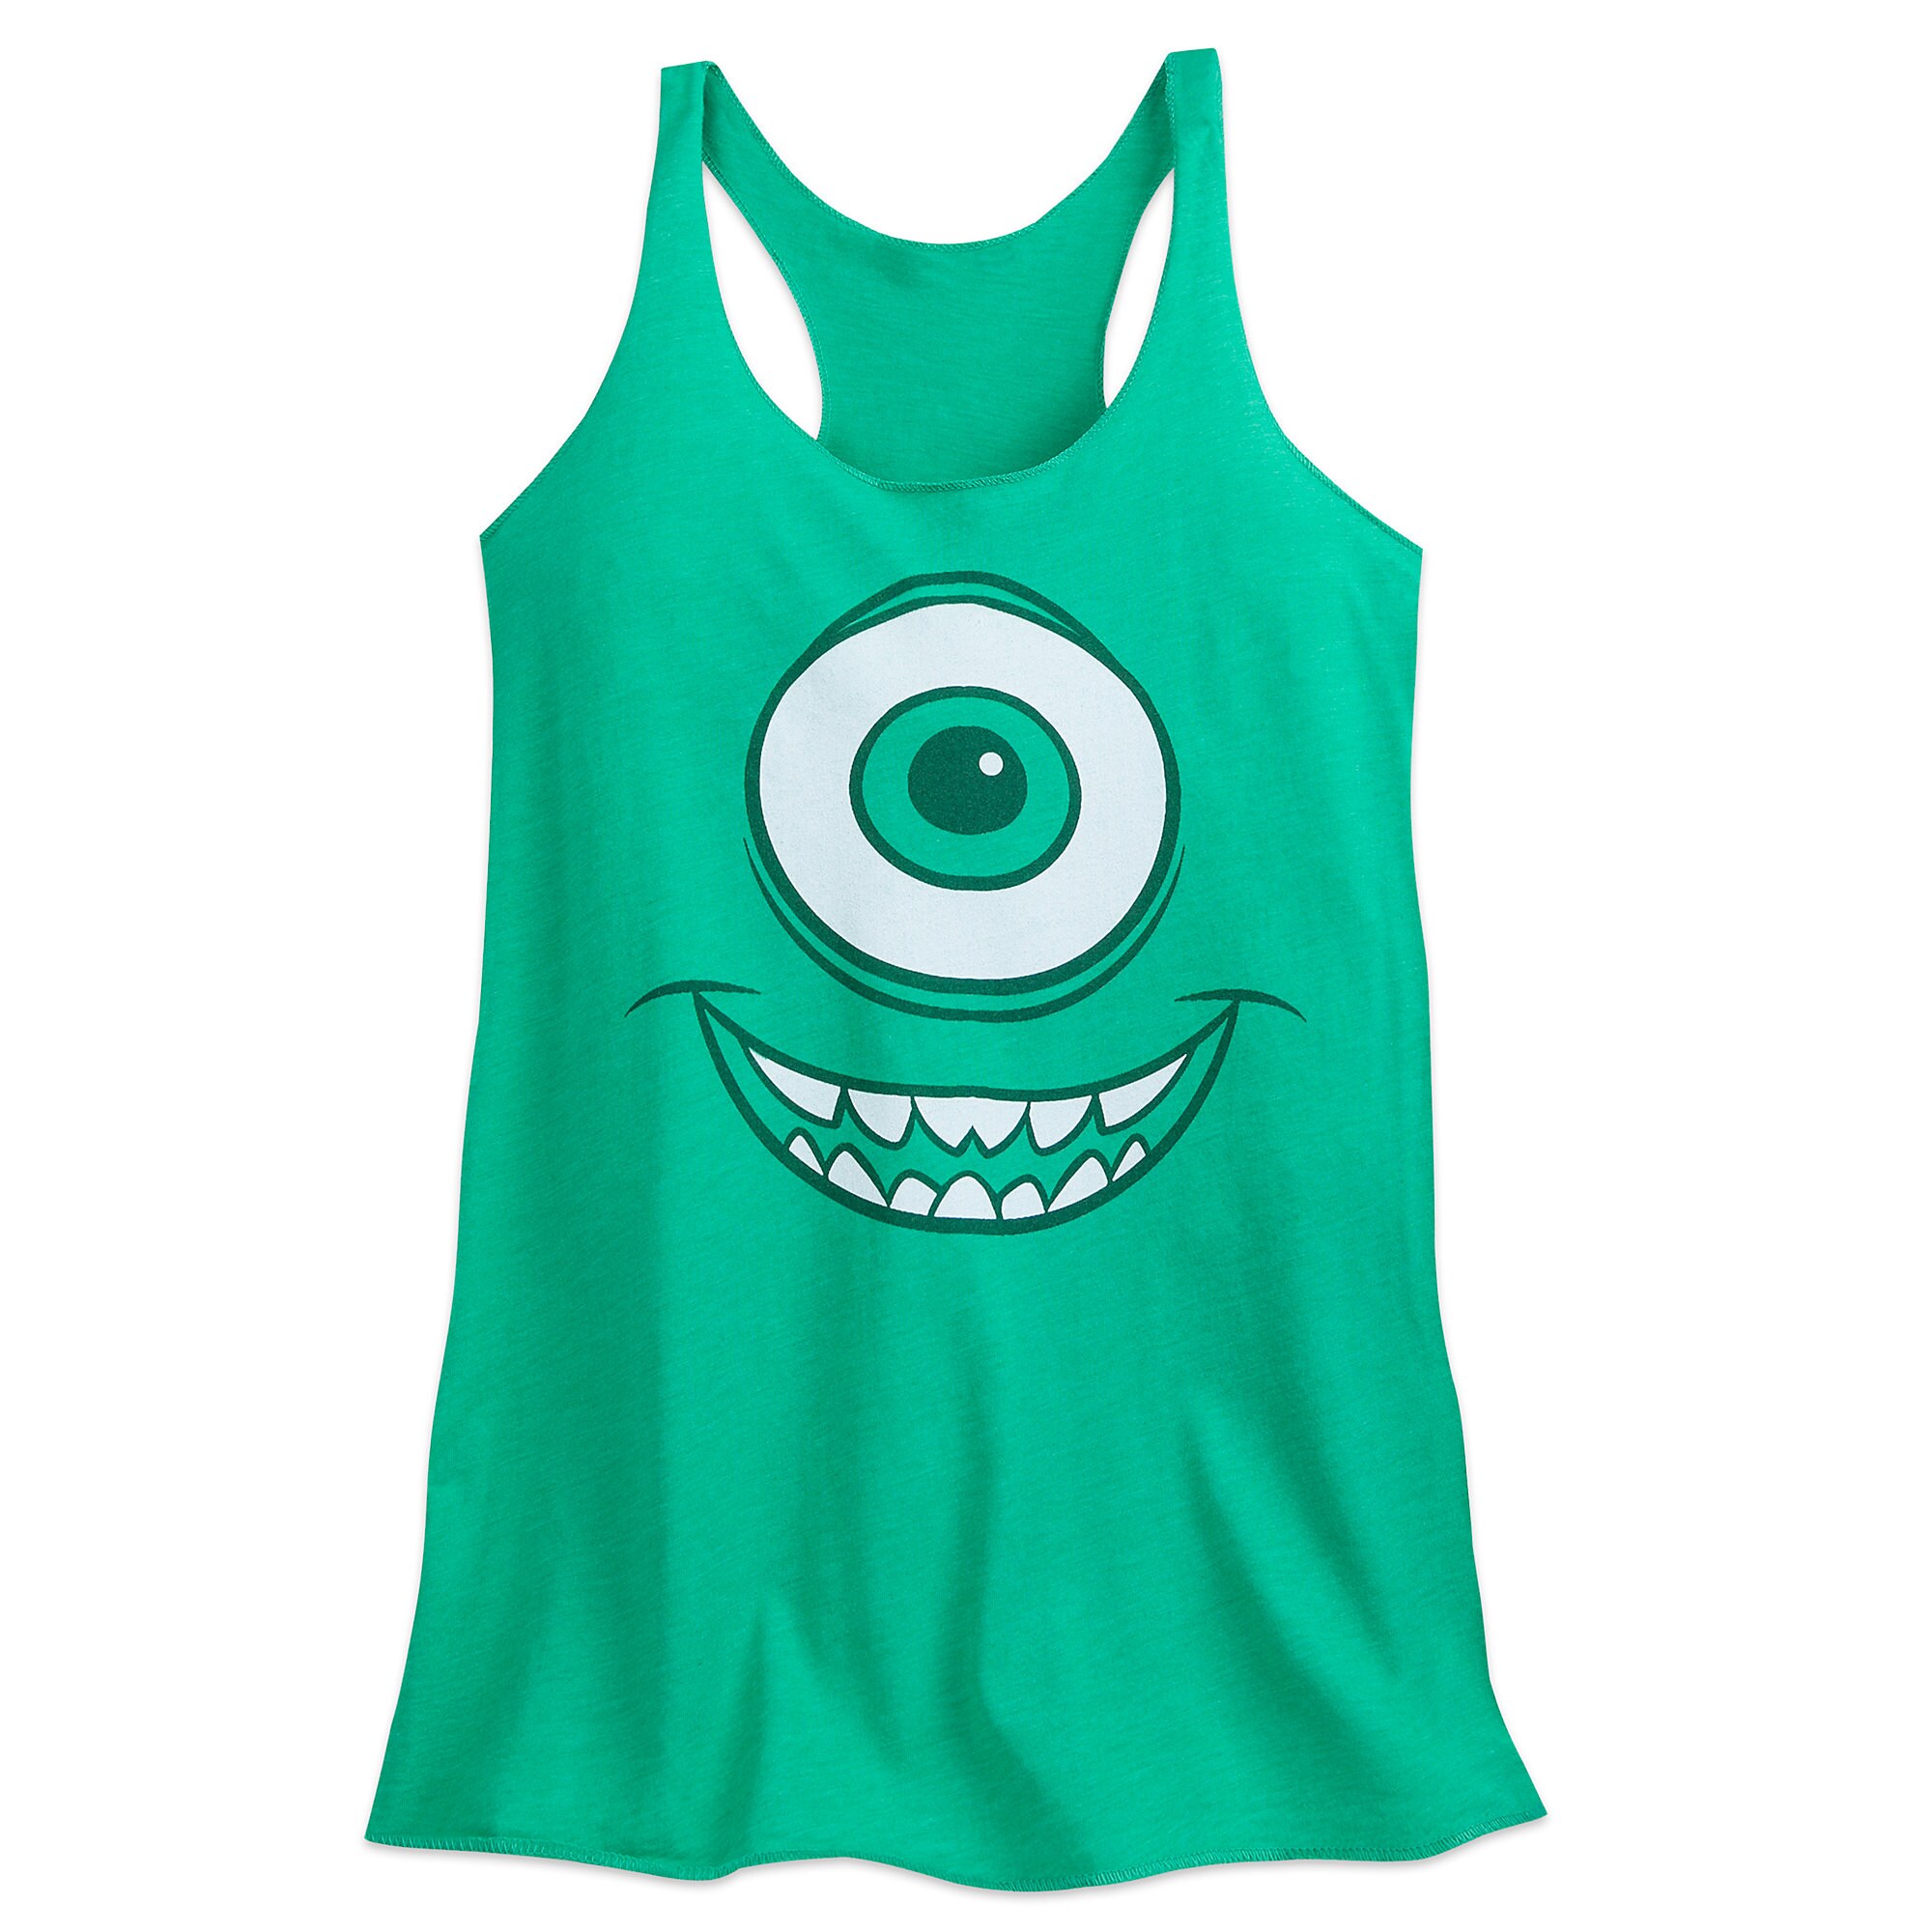 Mike Wazowski Tank Top for Adults - Monsters, Inc.